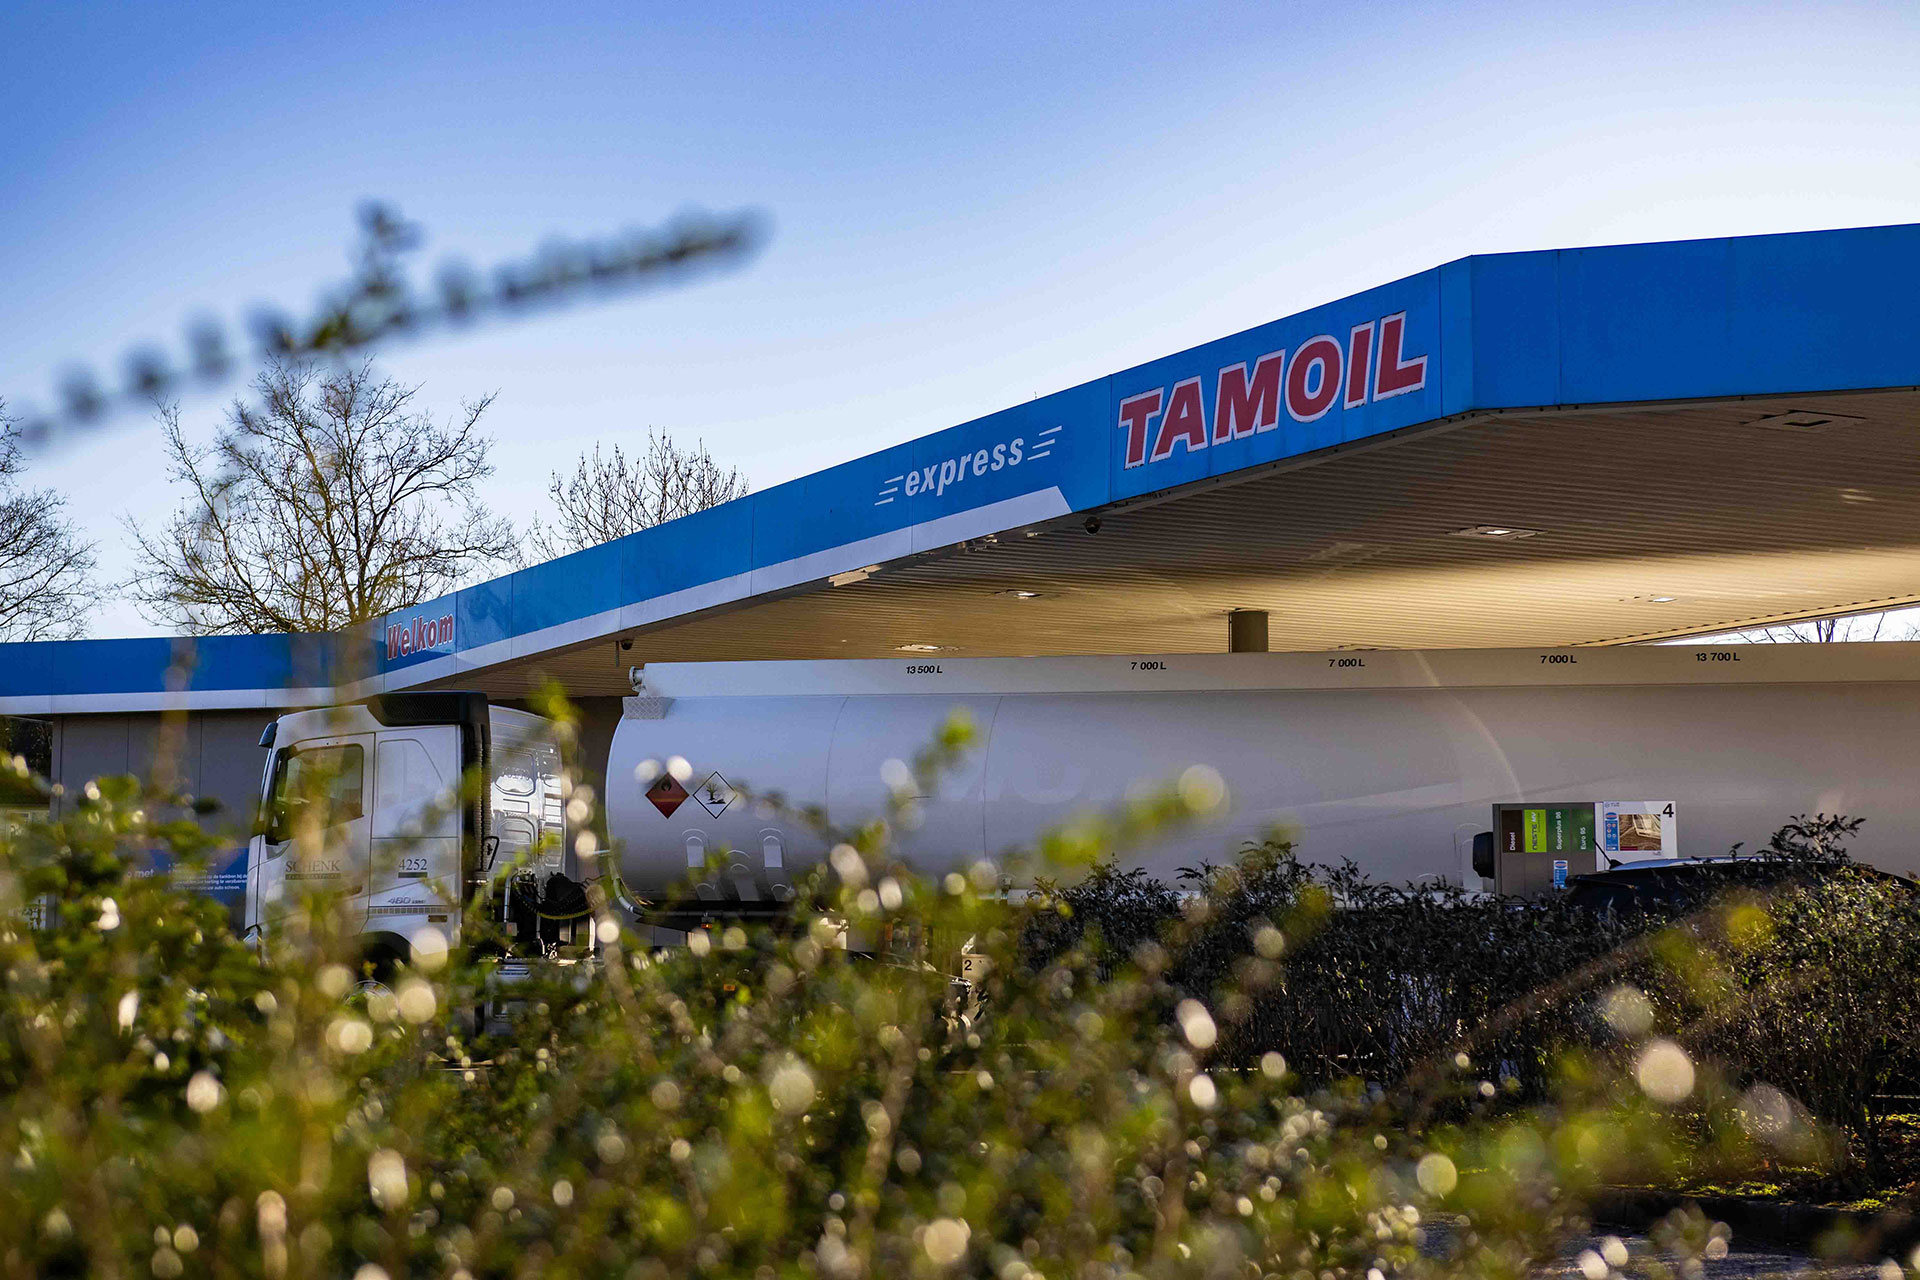 Going the extra mile: keeping Tamoil’s fuel stations stocked